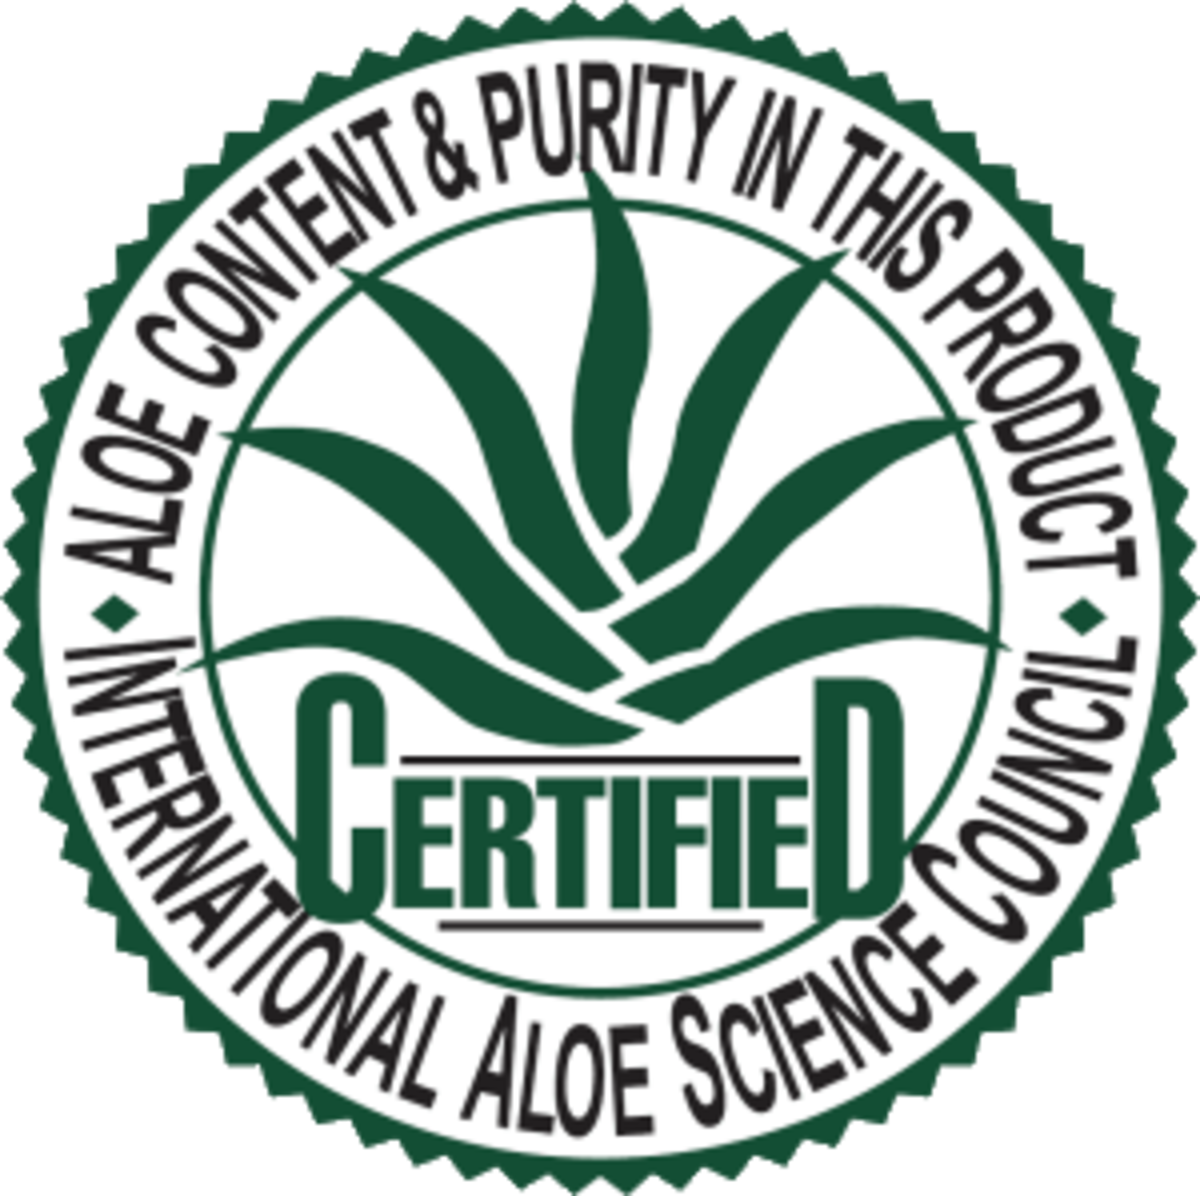 International Aloe Science Council Stamp